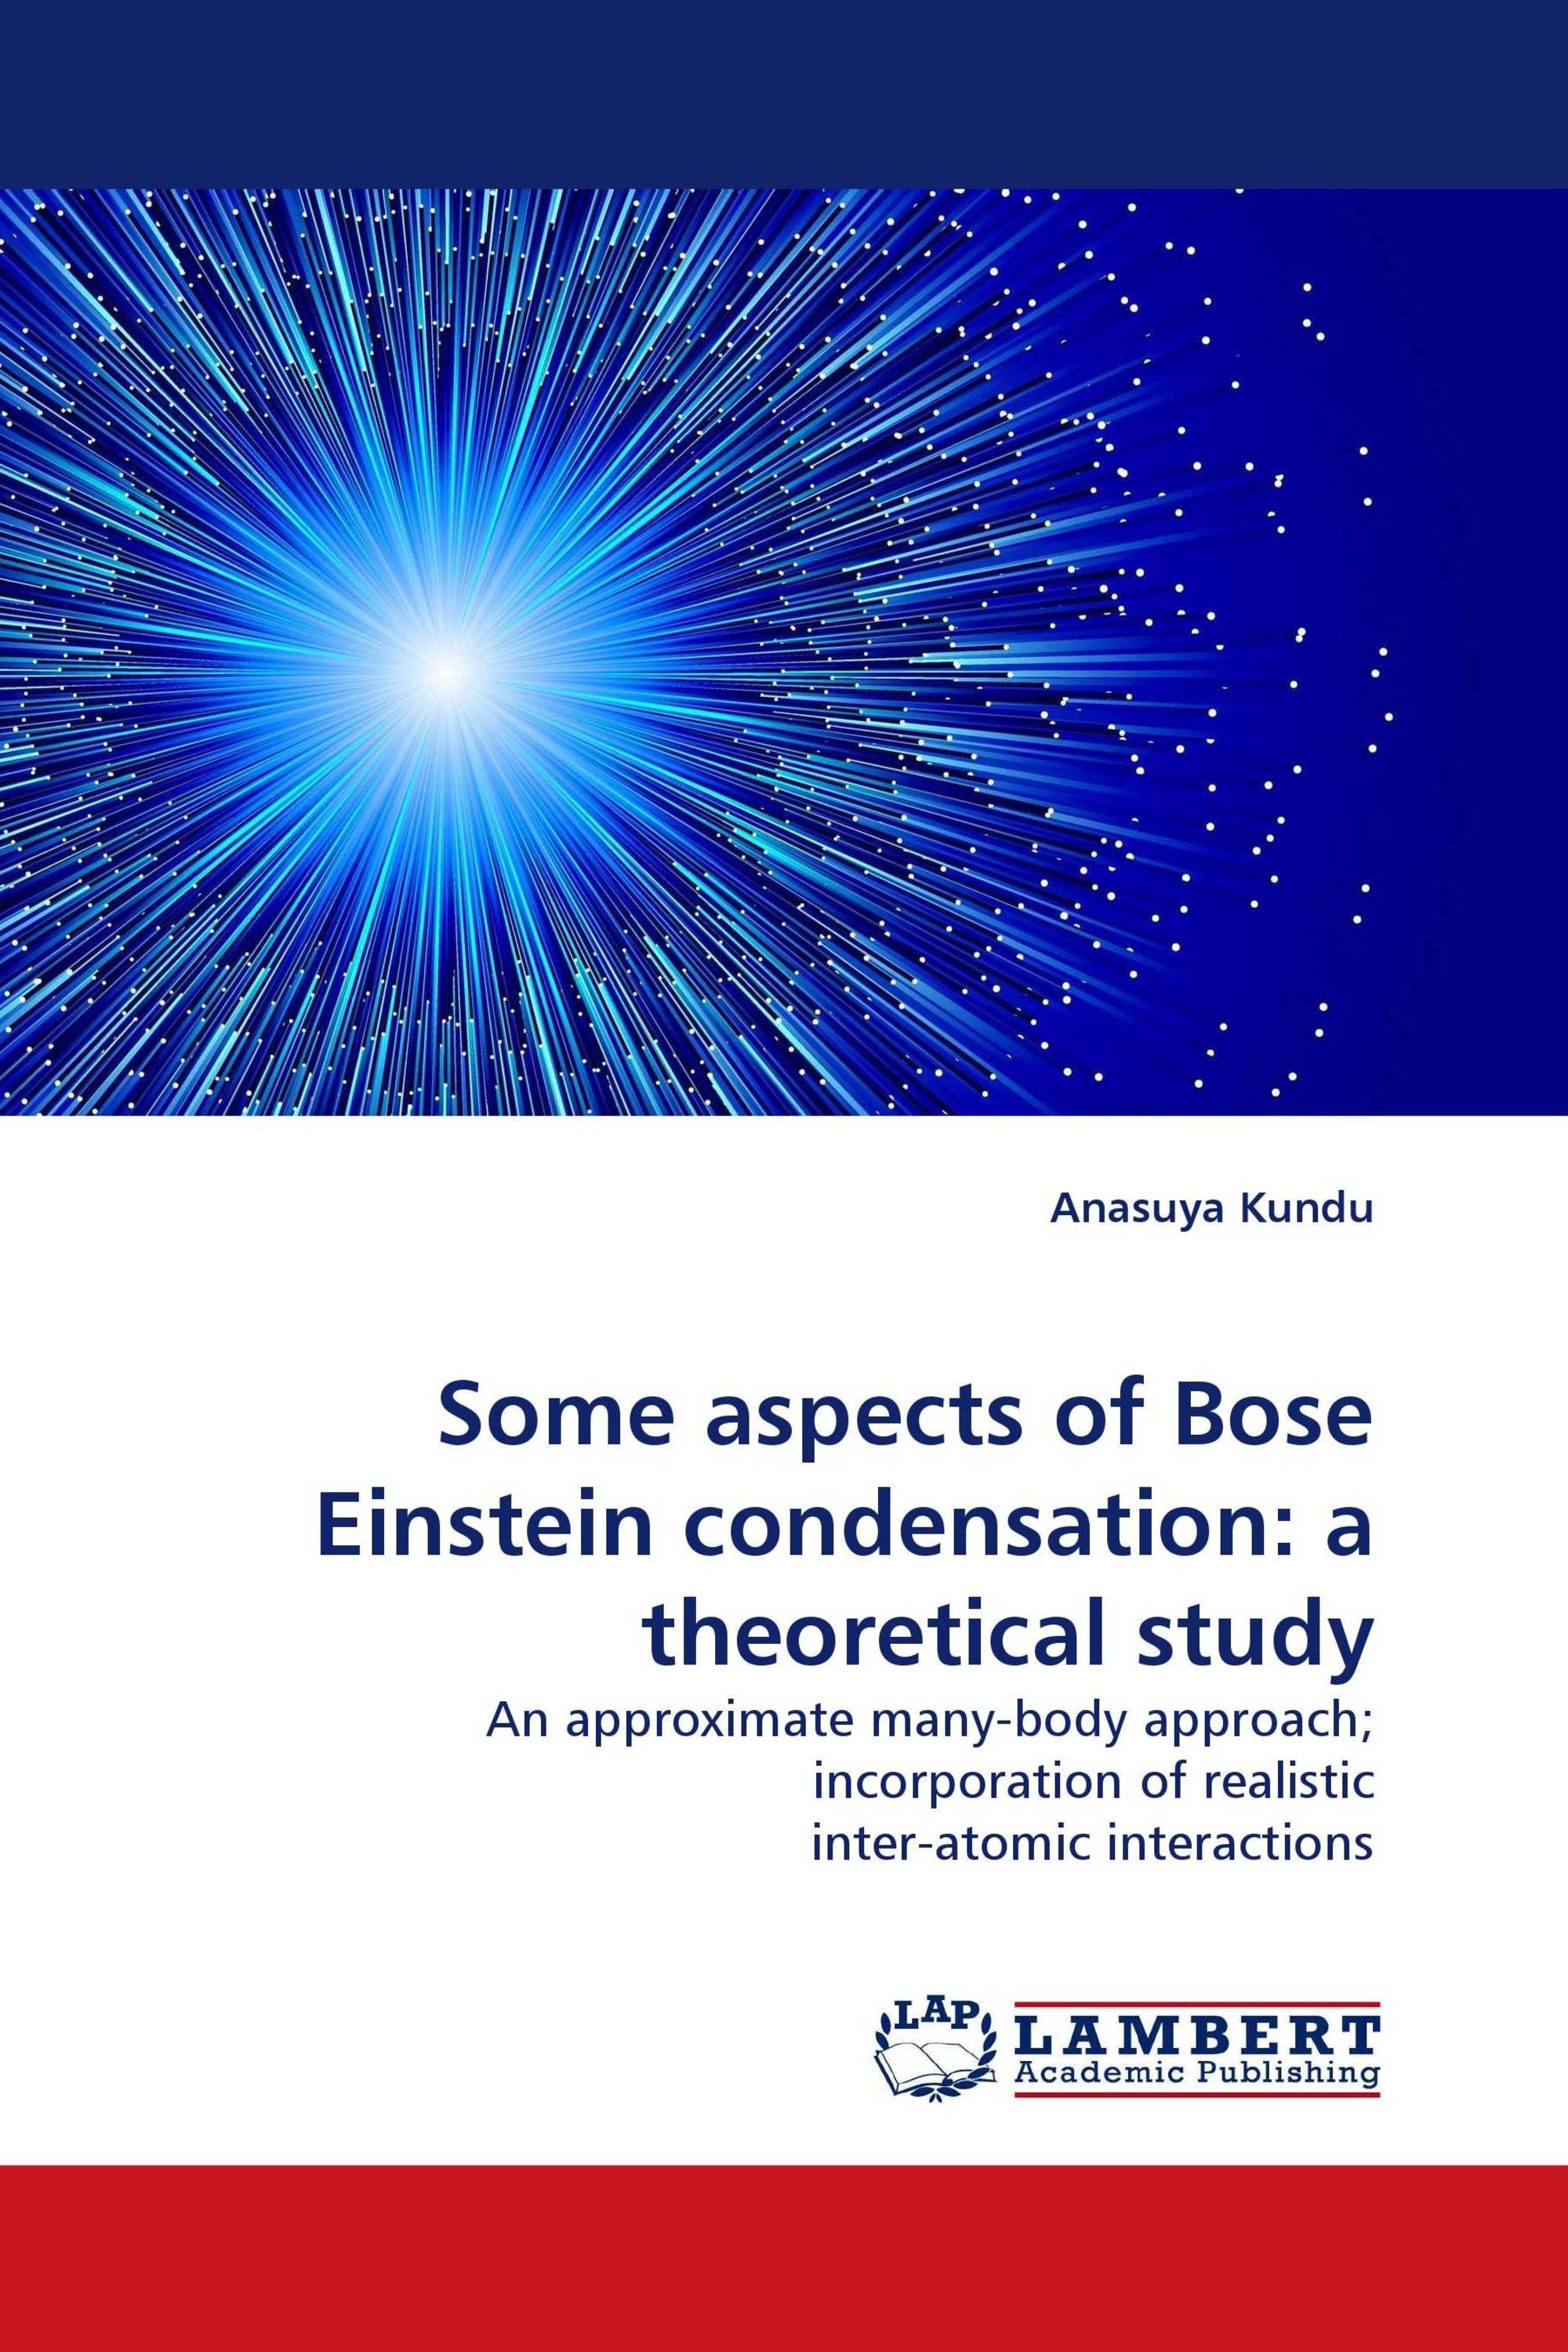 Some aspects of Bose Einstein condensation: a theoretical study